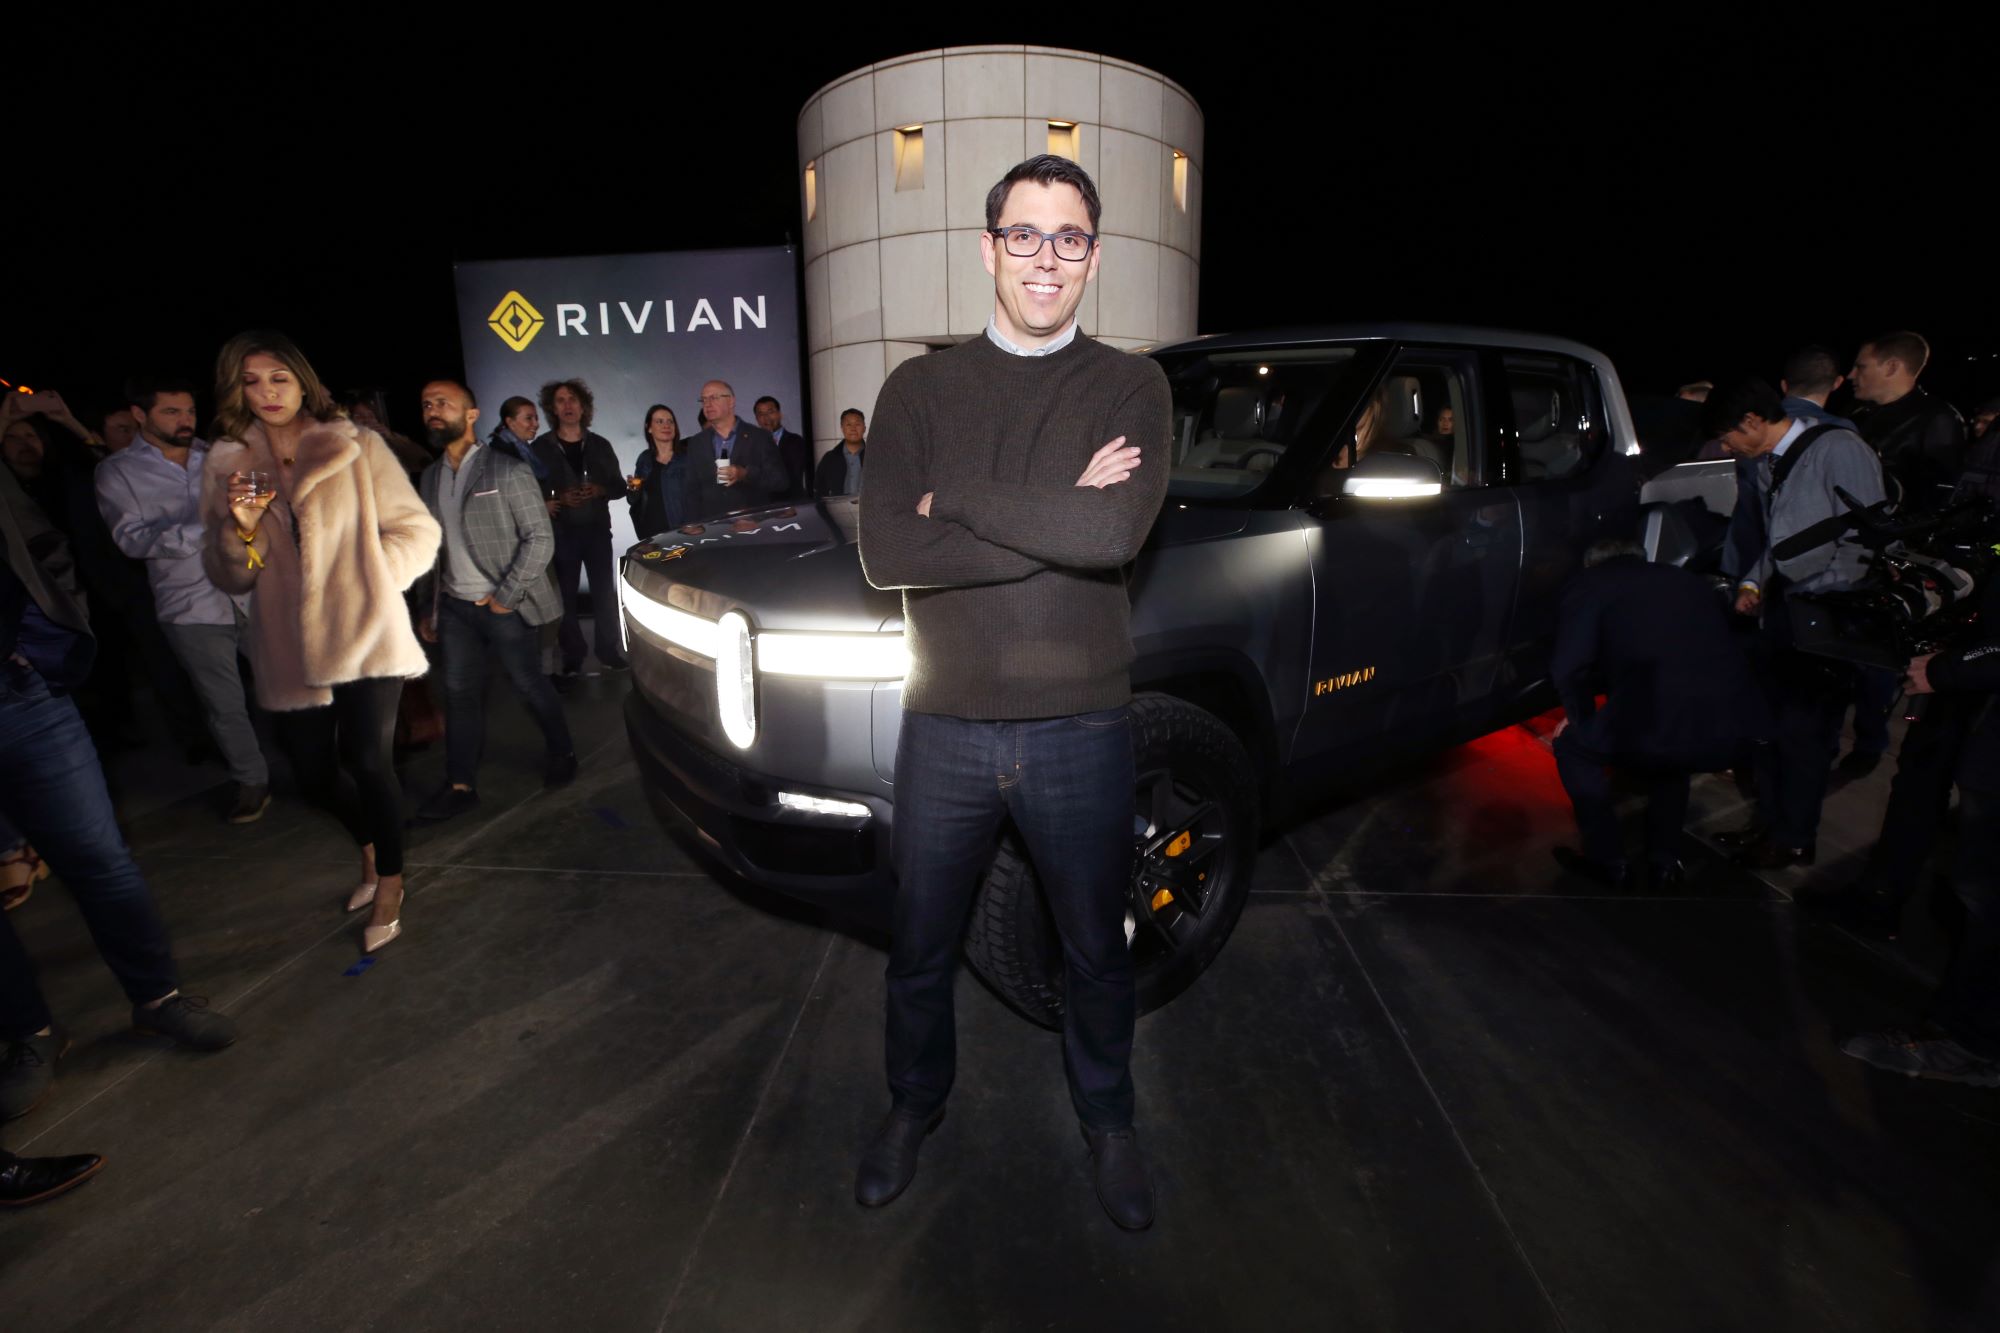 Rivian's CEO, known to have commented on the battery shortage, standing in front of a Rivian pickup truck.